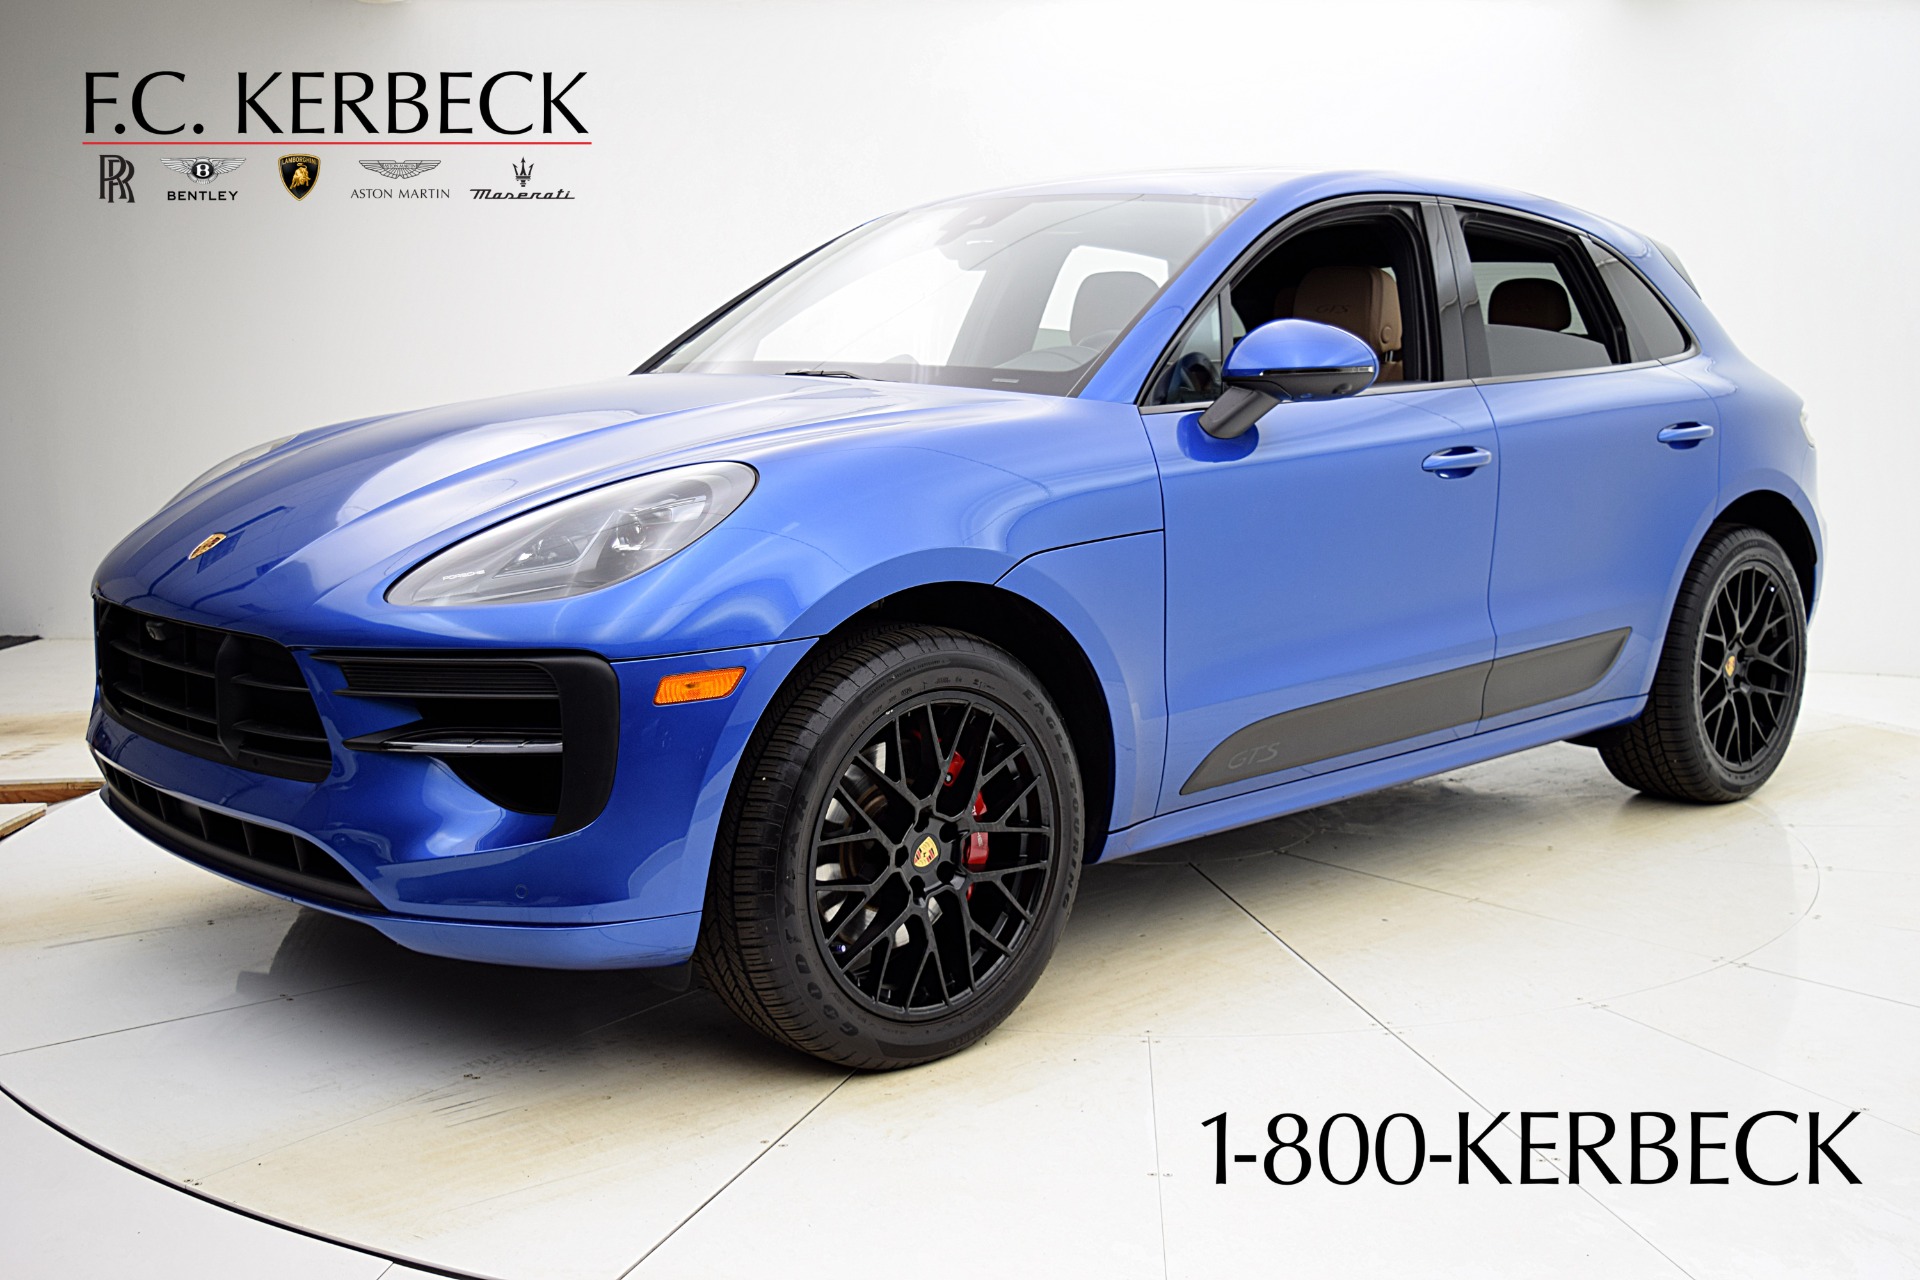 Used 2021 Porsche Macan GTS for sale $74,000 at Bentley Palmyra N.J. in Palmyra NJ 08065 2